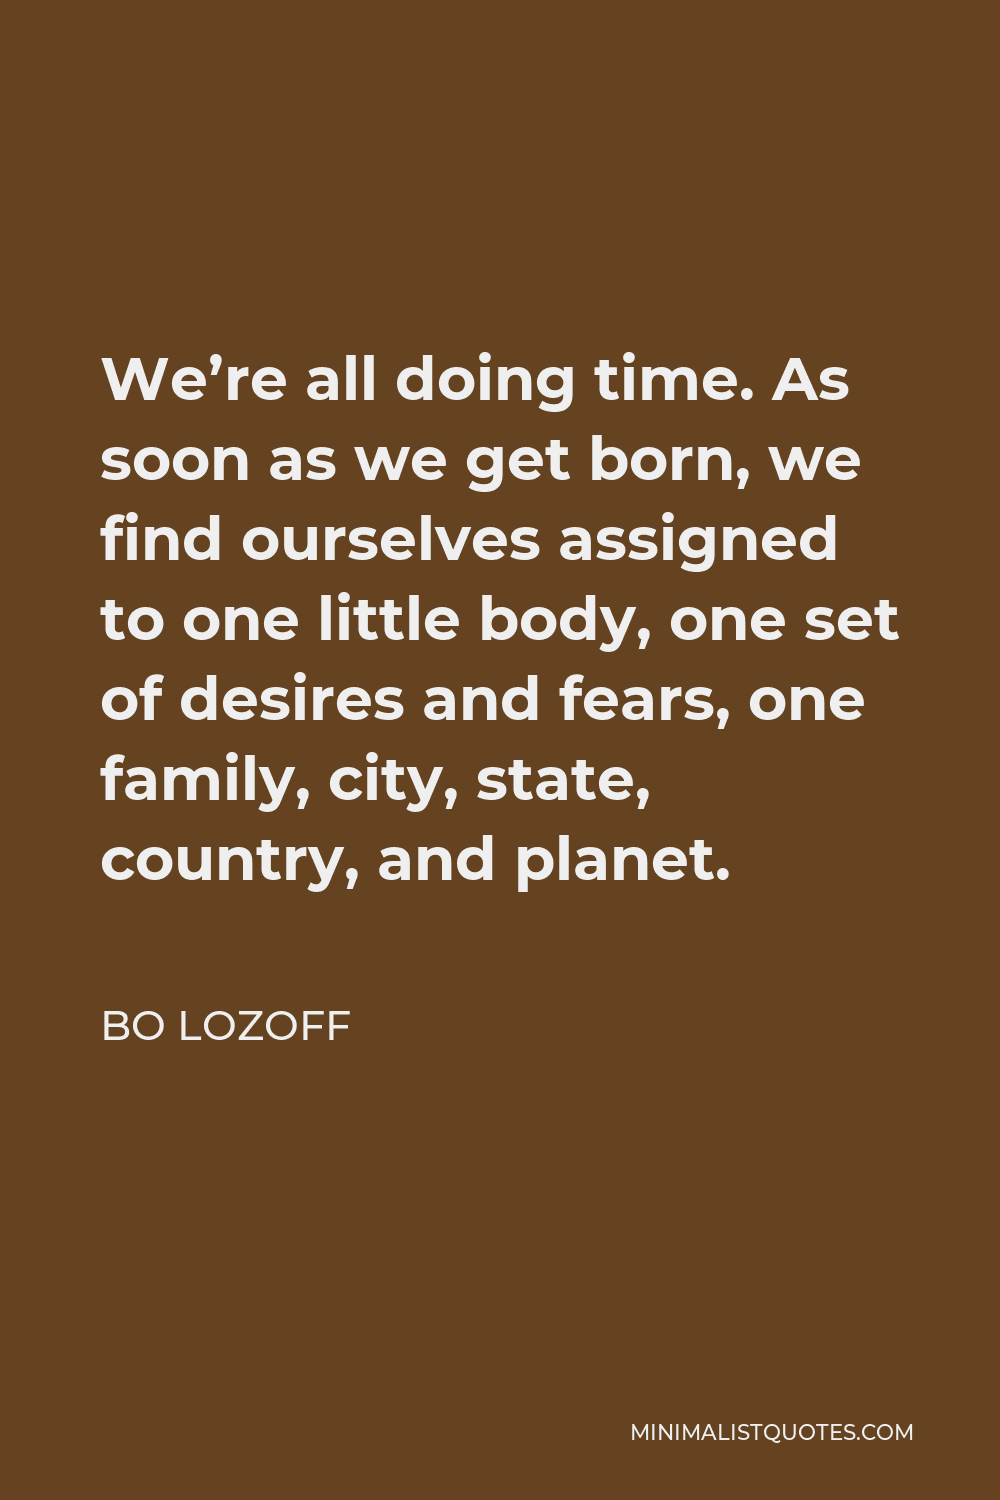 Bo Lozoff Quote - We’re all doing time. As soon as we get born, we find ourselves assigned to one little body, one set of desires and fears, one family, city, state, country, and planet.